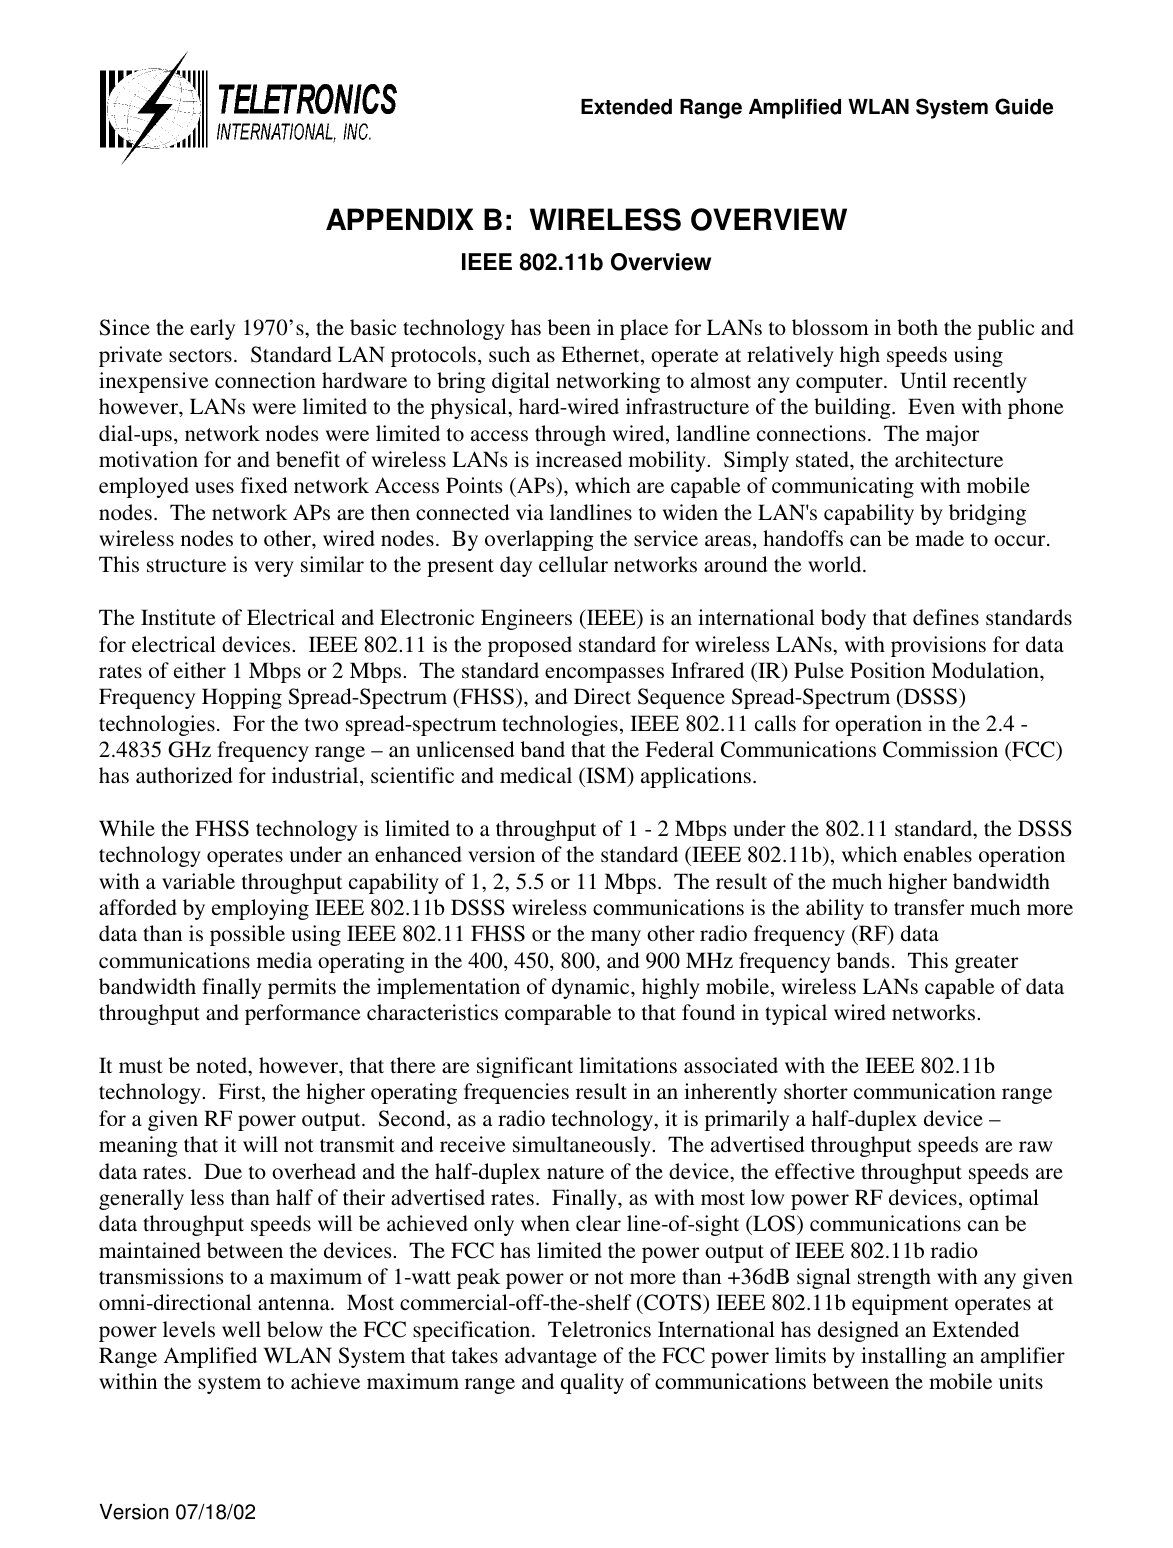   Extended Range Amplified WLAN System Guide  Version 07/18/02   APPENDIX B:  WIRELESS OVERVIEW IEEE 802.11b Overview  Since the early 1970’s, the basic technology has been in place for LANs to blossom in both the public and private sectors.  Standard LAN protocols, such as Ethernet, operate at relatively high speeds using inexpensive connection hardware to bring digital networking to almost any computer.  Until recently however, LANs were limited to the physical, hard-wired infrastructure of the building.  Even with phone dial-ups, network nodes were limited to access through wired, landline connections.  The major motivation for and benefit of wireless LANs is increased mobility.  Simply stated, the architecture employed uses fixed network Access Points (APs), which are capable of communicating with mobile nodes.  The network APs are then connected via landlines to widen the LAN&apos;s capability by bridging wireless nodes to other, wired nodes.  By overlapping the service areas, handoffs can be made to occur.  This structure is very similar to the present day cellular networks around the world.  The Institute of Electrical and Electronic Engineers (IEEE) is an international body that defines standards for electrical devices.  IEEE 802.11 is the proposed standard for wireless LANs, with provisions for data rates of either 1 Mbps or 2 Mbps.  The standard encompasses Infrared (IR) Pulse Position Modulation, Frequency Hopping Spread-Spectrum (FHSS), and Direct Sequence Spread-Spectrum (DSSS) technologies.  For the two spread-spectrum technologies, IEEE 802.11 calls for operation in the 2.4 - 2.4835 GHz frequency range – an unlicensed band that the Federal Communications Commission (FCC) has authorized for industrial, scientific and medical (ISM) applications.   While the FHSS technology is limited to a throughput of 1 - 2 Mbps under the 802.11 standard, the DSSS technology operates under an enhanced version of the standard (IEEE 802.11b), which enables operation with a variable throughput capability of 1, 2, 5.5 or 11 Mbps.  The result of the much higher bandwidth afforded by employing IEEE 802.11b DSSS wireless communications is the ability to transfer much more data than is possible using IEEE 802.11 FHSS or the many other radio frequency (RF) data communications media operating in the 400, 450, 800, and 900 MHz frequency bands.  This greater bandwidth finally permits the implementation of dynamic, highly mobile, wireless LANs capable of data throughput and performance characteristics comparable to that found in typical wired networks.   It must be noted, however, that there are significant limitations associated with the IEEE 802.11b technology.  First, the higher operating frequencies result in an inherently shorter communication range for a given RF power output.  Second, as a radio technology, it is primarily a half-duplex device – meaning that it will not transmit and receive simultaneously.  The advertised throughput speeds are raw data rates.  Due to overhead and the half-duplex nature of the device, the effective throughput speeds are generally less than half of their advertised rates.  Finally, as with most low power RF devices, optimal data throughput speeds will be achieved only when clear line-of-sight (LOS) communications can be maintained between the devices.  The FCC has limited the power output of IEEE 802.11b radio transmissions to a maximum of 1-watt peak power or not more than +36dB signal strength with any given omni-directional antenna.  Most commercial-off-the-shelf (COTS) IEEE 802.11b equipment operates at power levels well below the FCC specification.  Teletronics International has designed an Extended Range Amplified WLAN System that takes advantage of the FCC power limits by installing an amplifier within the system to achieve maximum range and quality of communications between the mobile units  